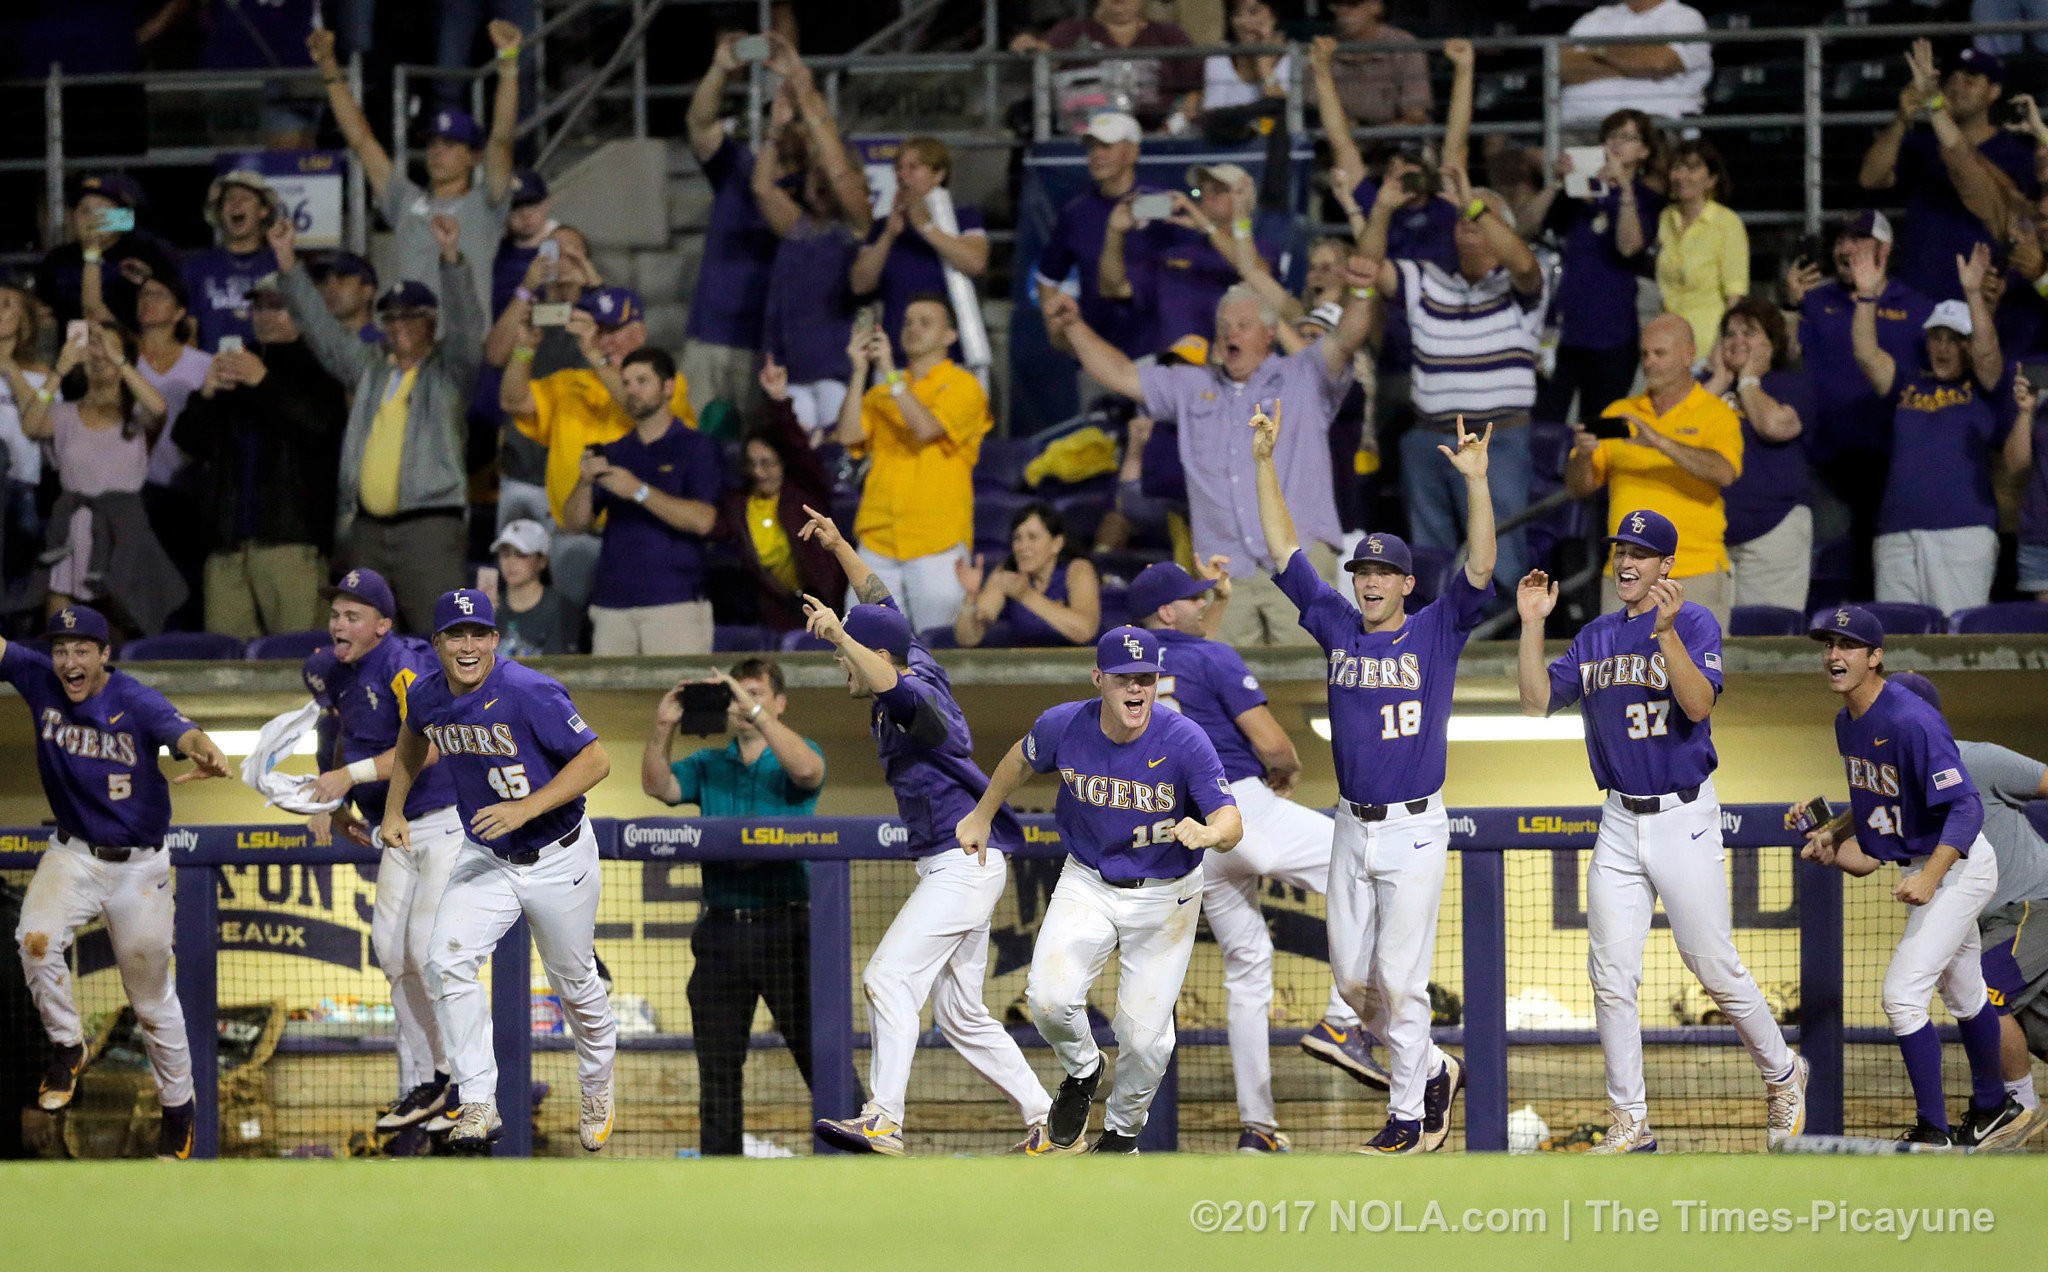 What LSU said about its College World Seriesclinching win